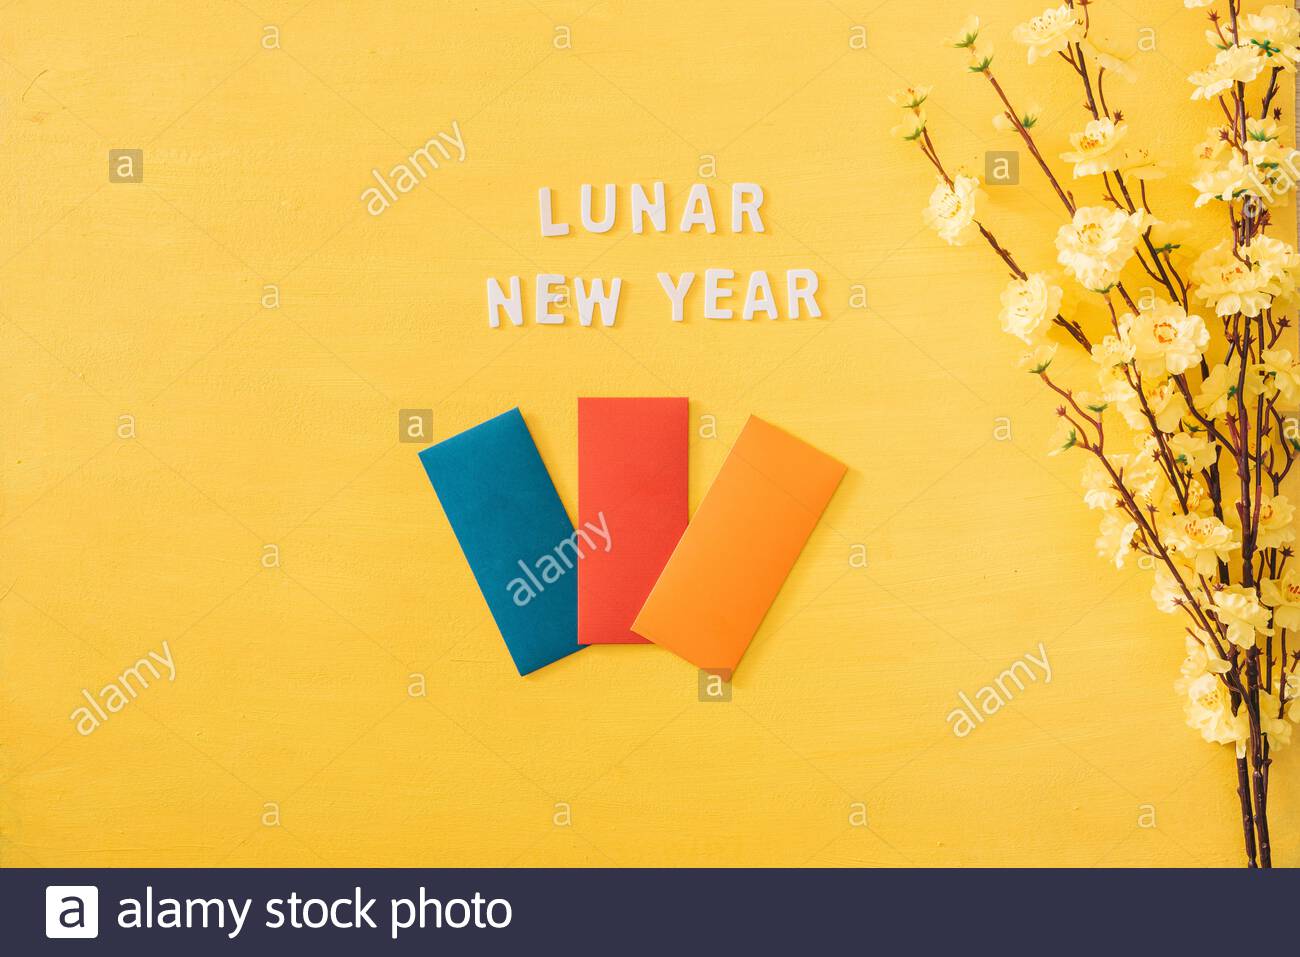 Lunar New Year Decoration On A Yellow Gold Background Tet Holiday